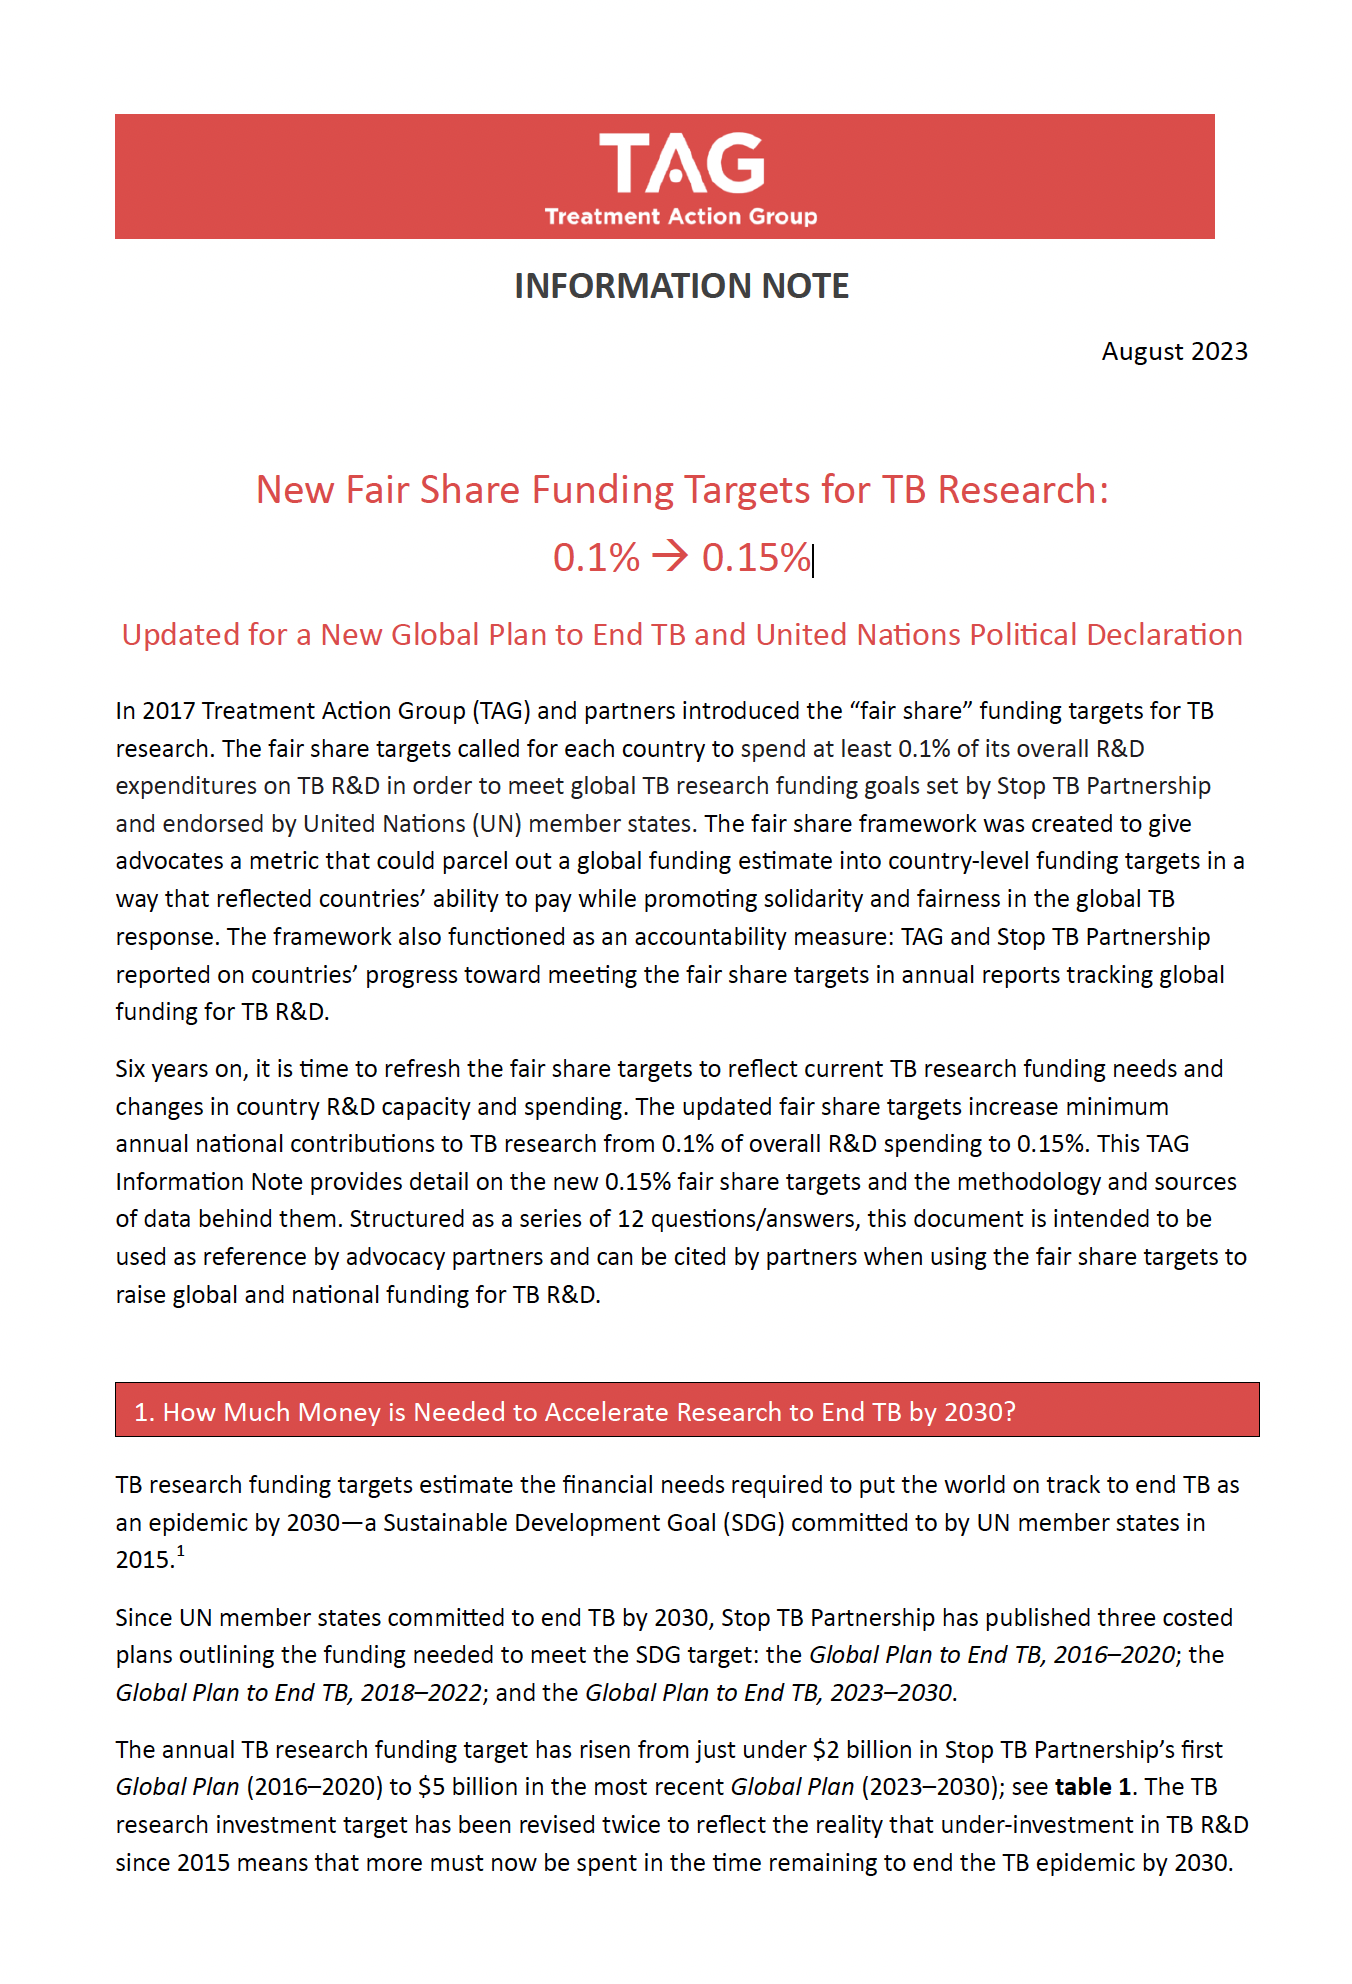 First page of the publication, Information Note: New Fair Share Funding Targets for TB Research 0.1% -> 0.15%